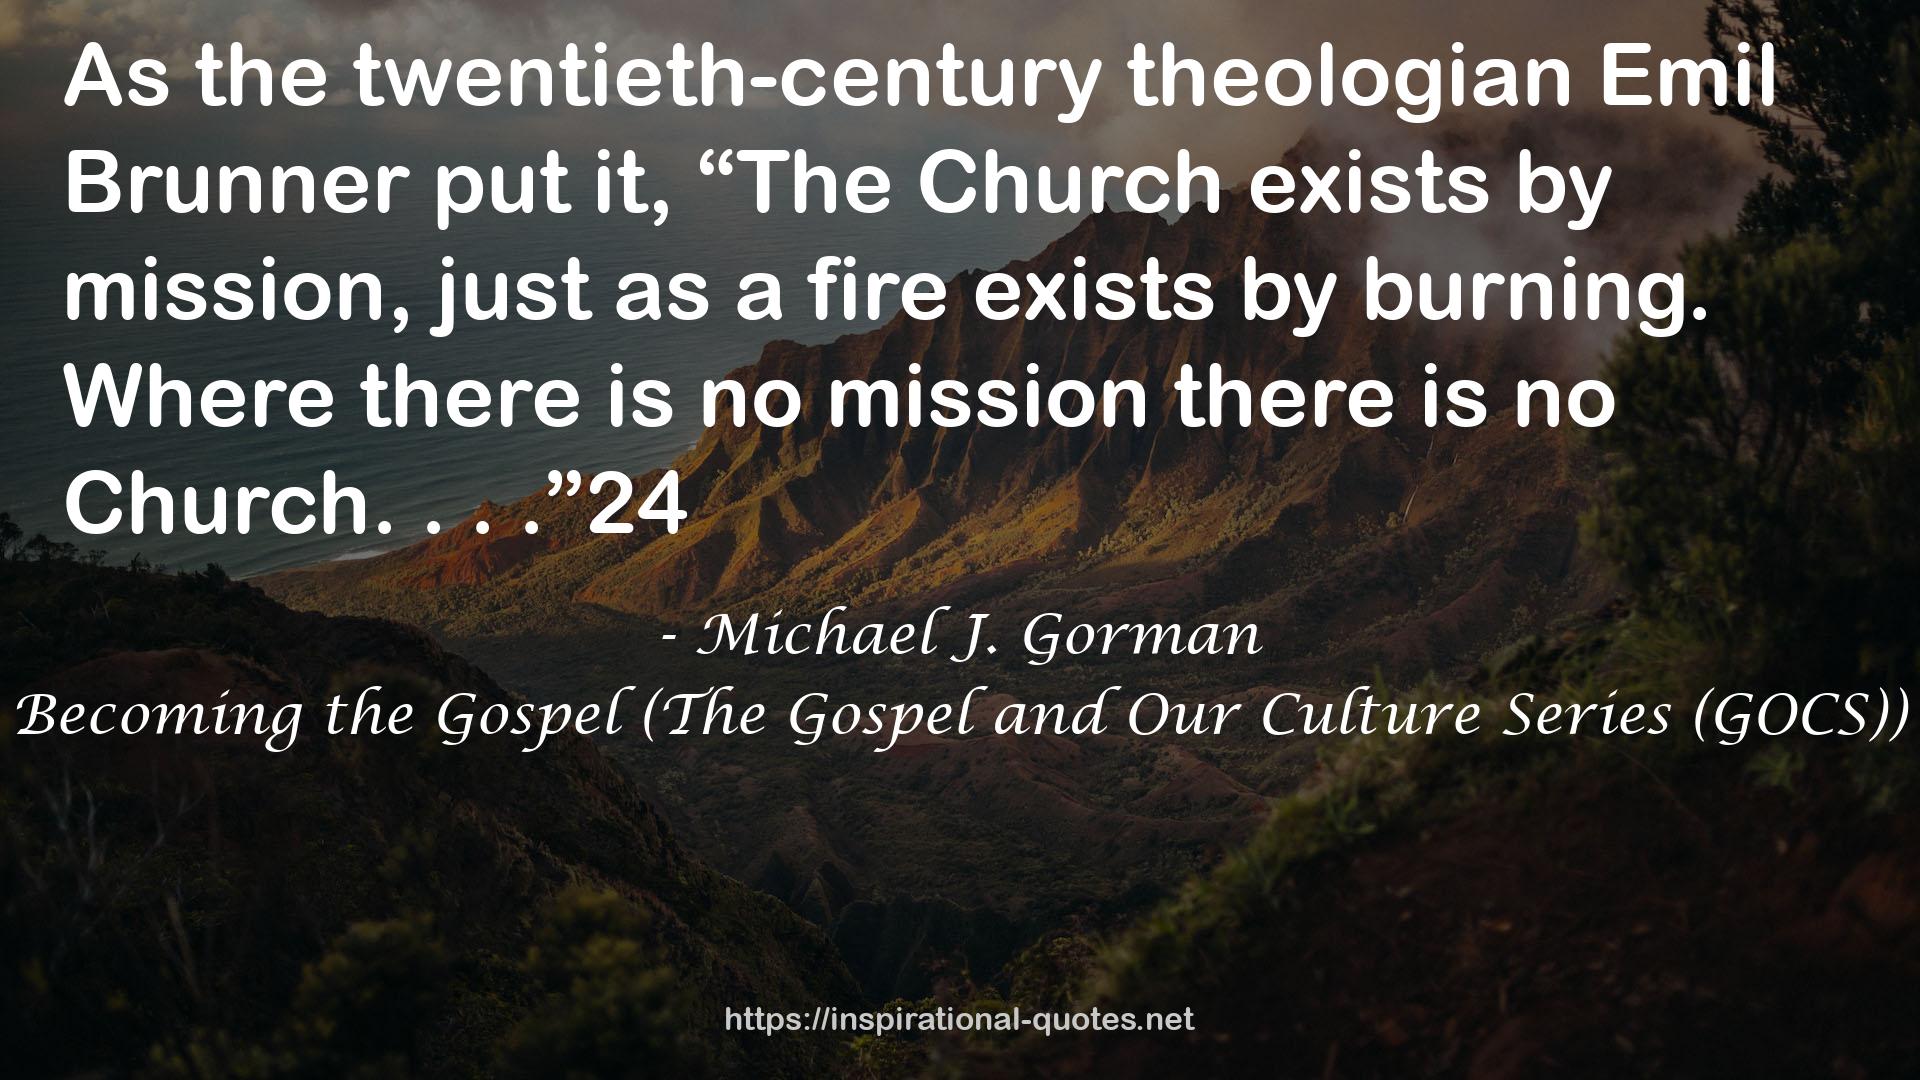 Becoming the Gospel (The Gospel and Our Culture Series (GOCS)) QUOTES